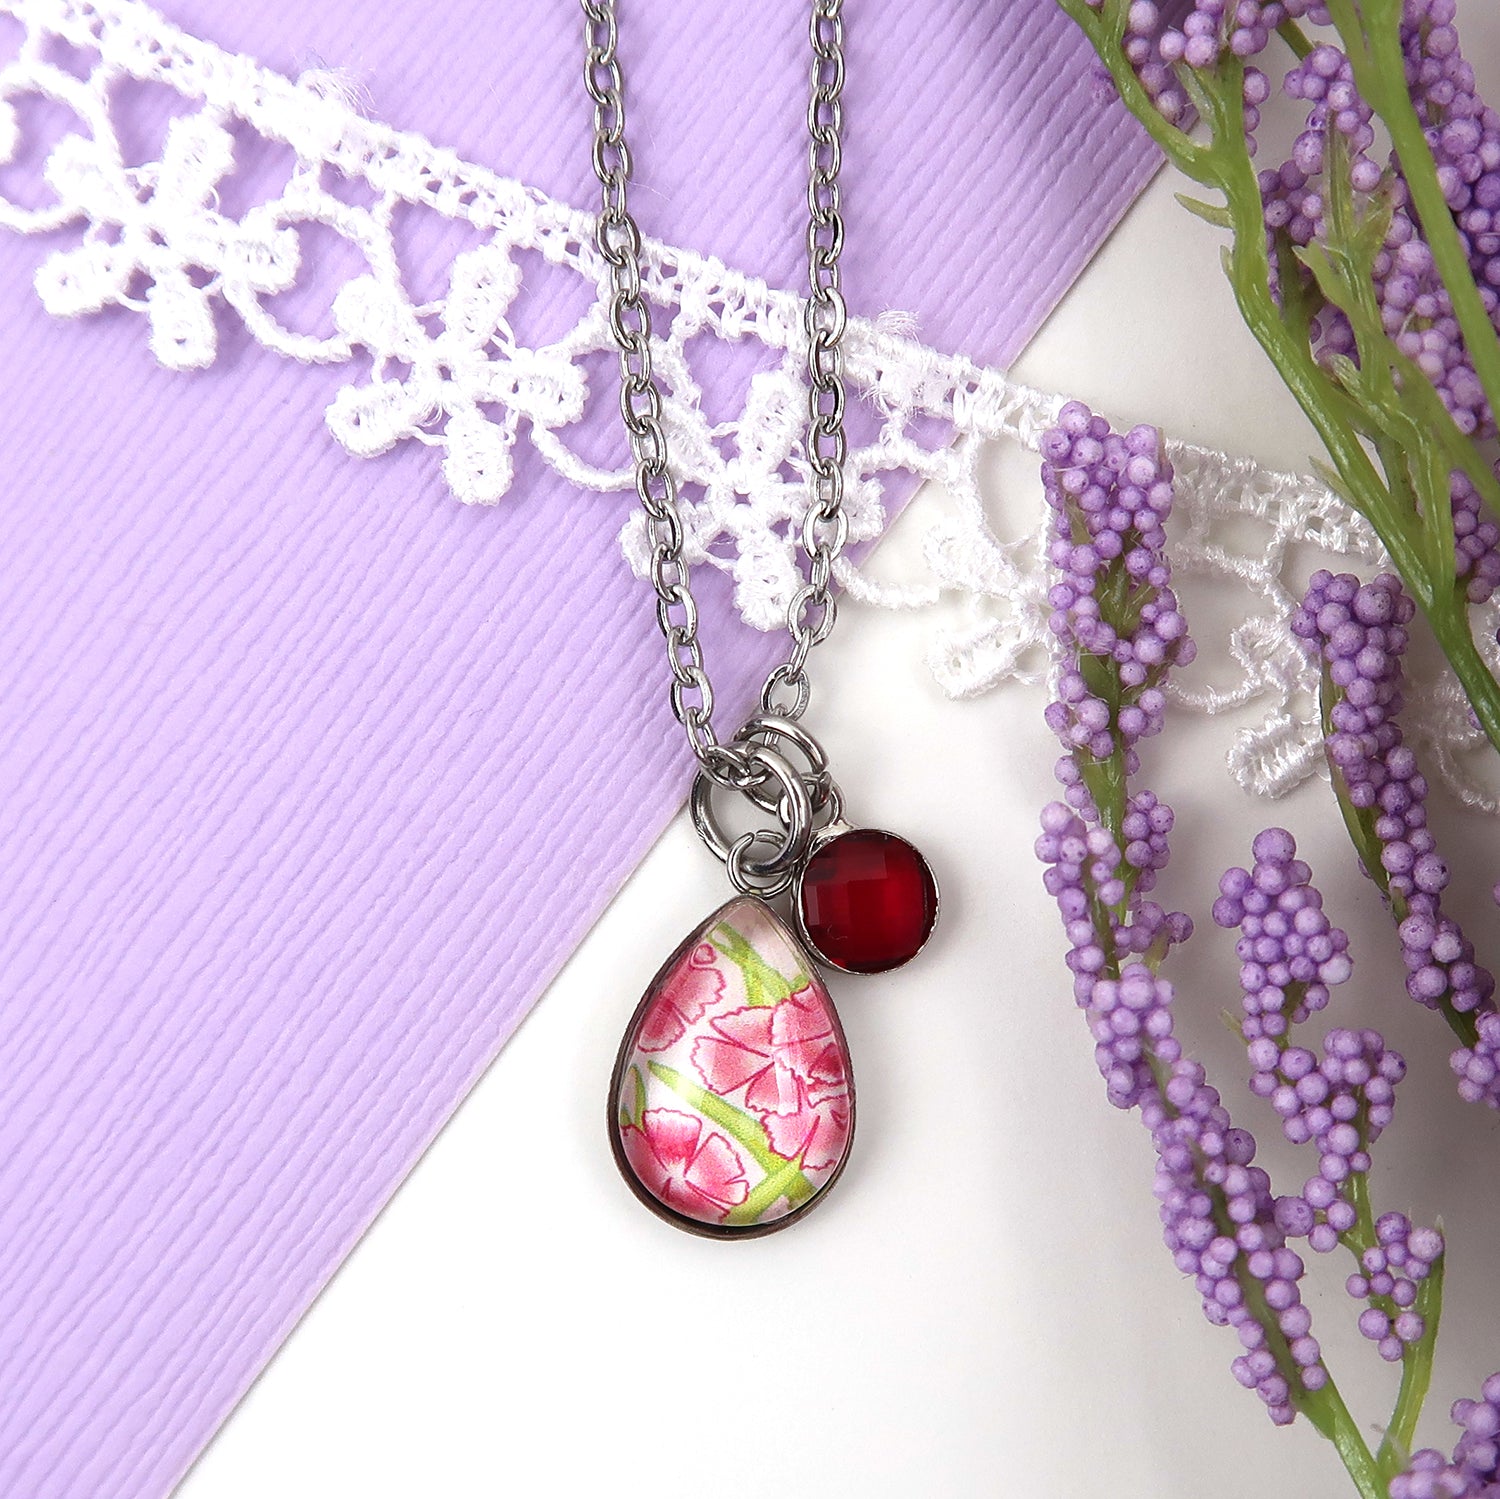 Arlisle Wildflower Bloom Necklace in Large, Birth Flower Necklace, Custom Birth  Flower Jewelry, Memorial Jewelry, Vintage Floral Necklace - Etsy